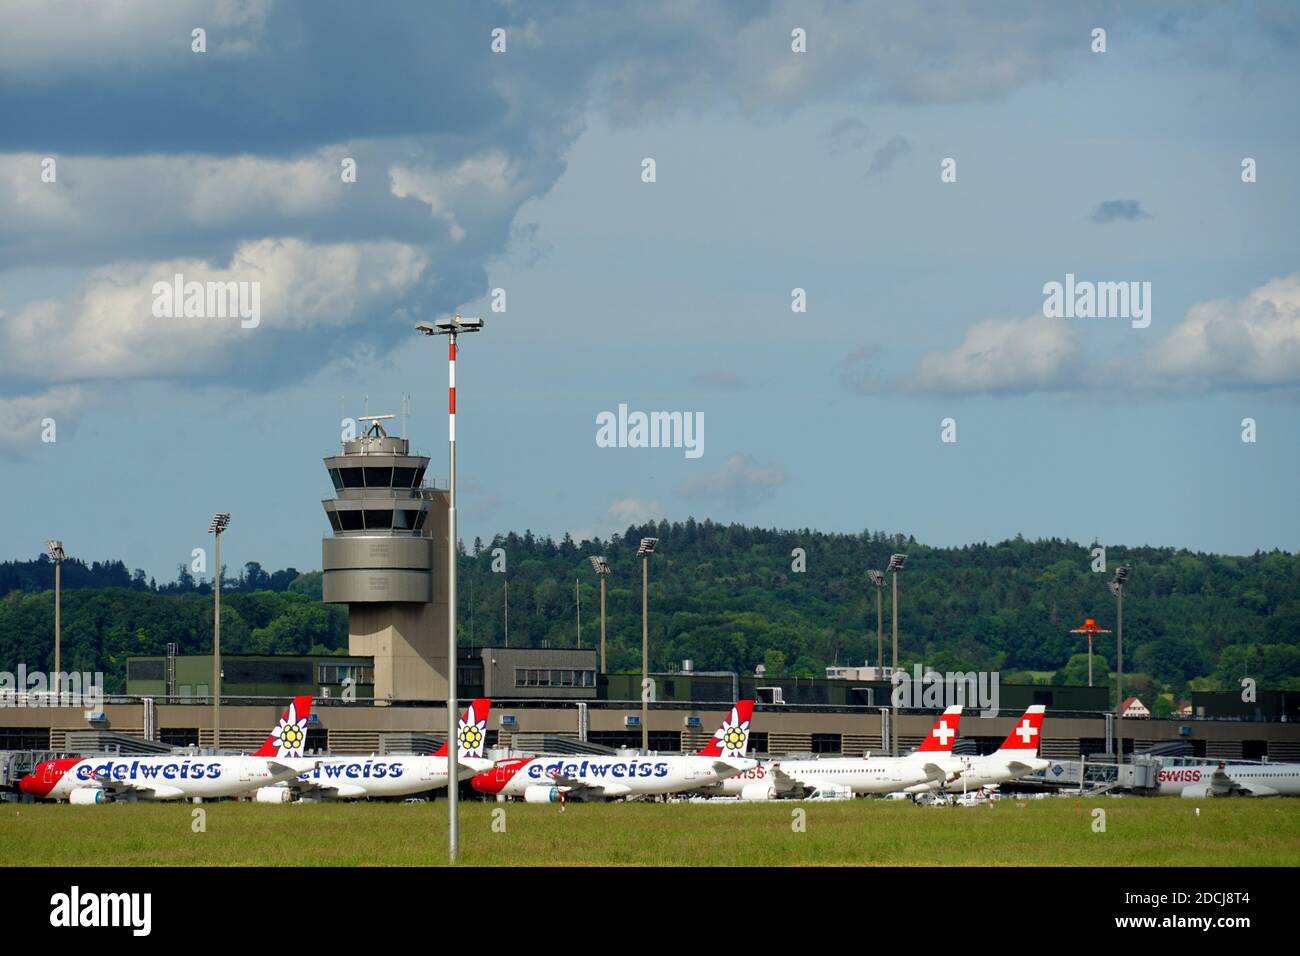 Control tower of airport Zurich in Switzerland. There are still standing airplanes as well since the transport after lockdown in the spring. Stock Photo